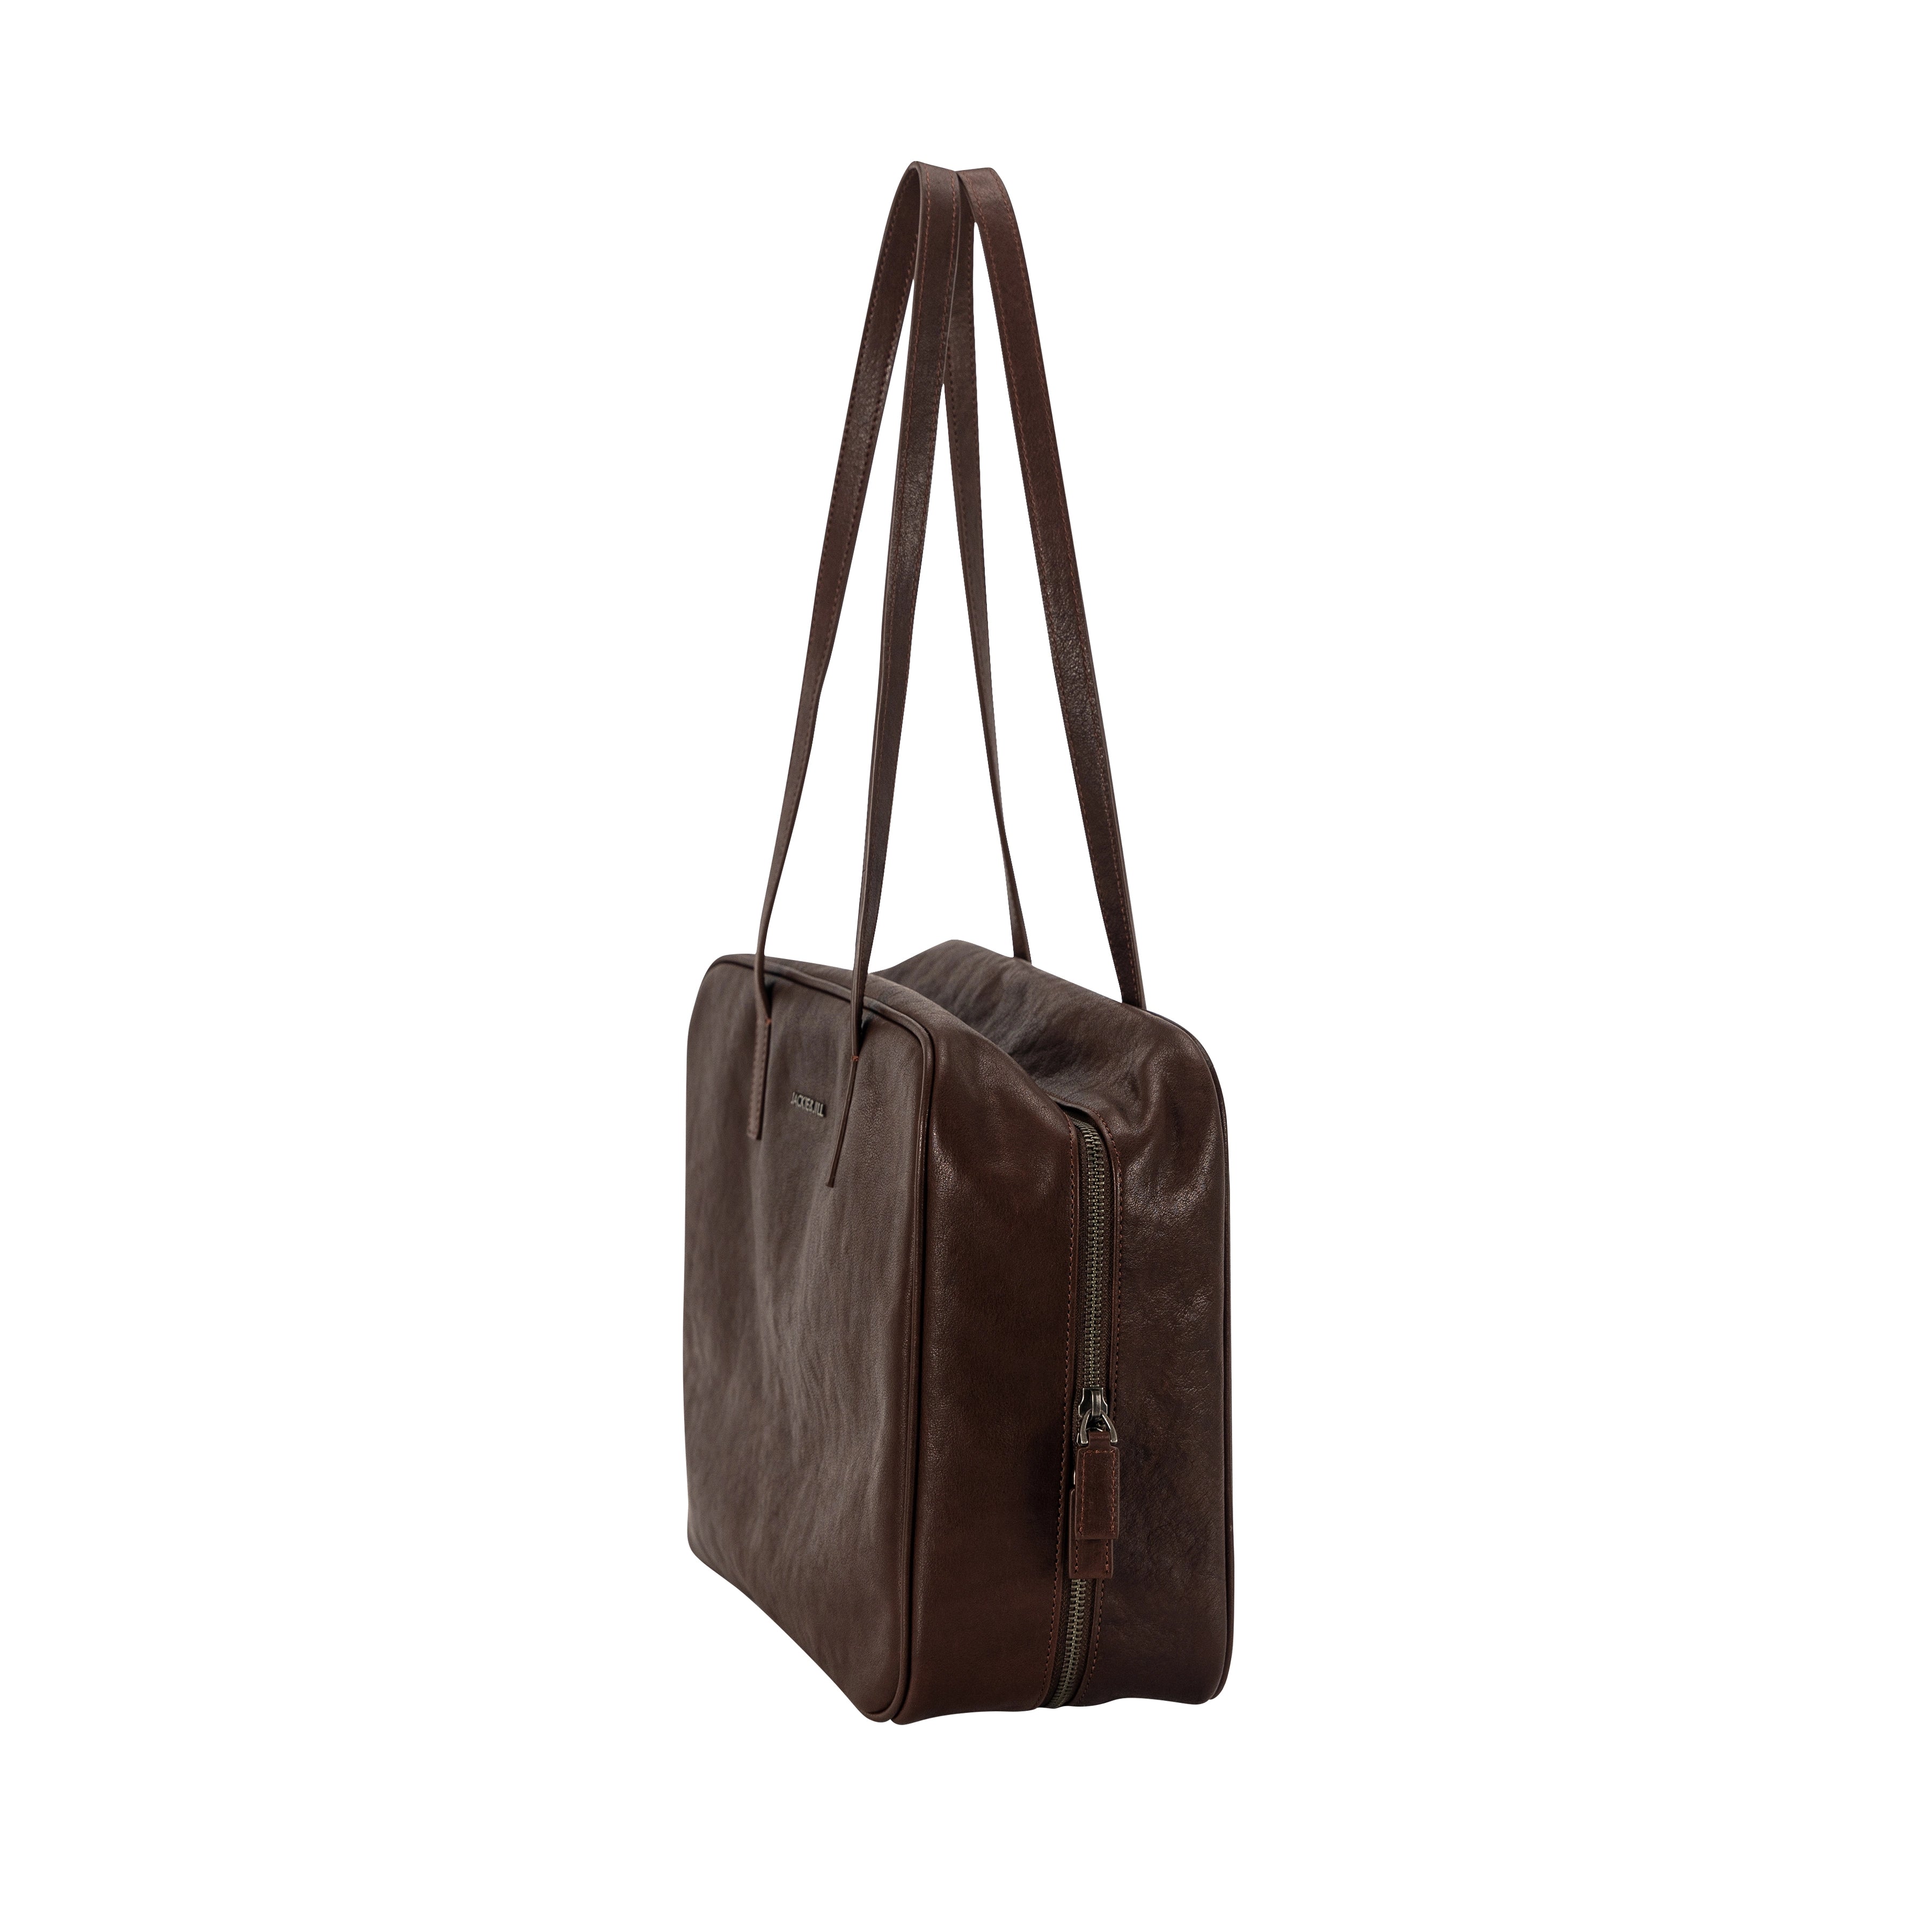 Genuine leather universal commuter business casual bag